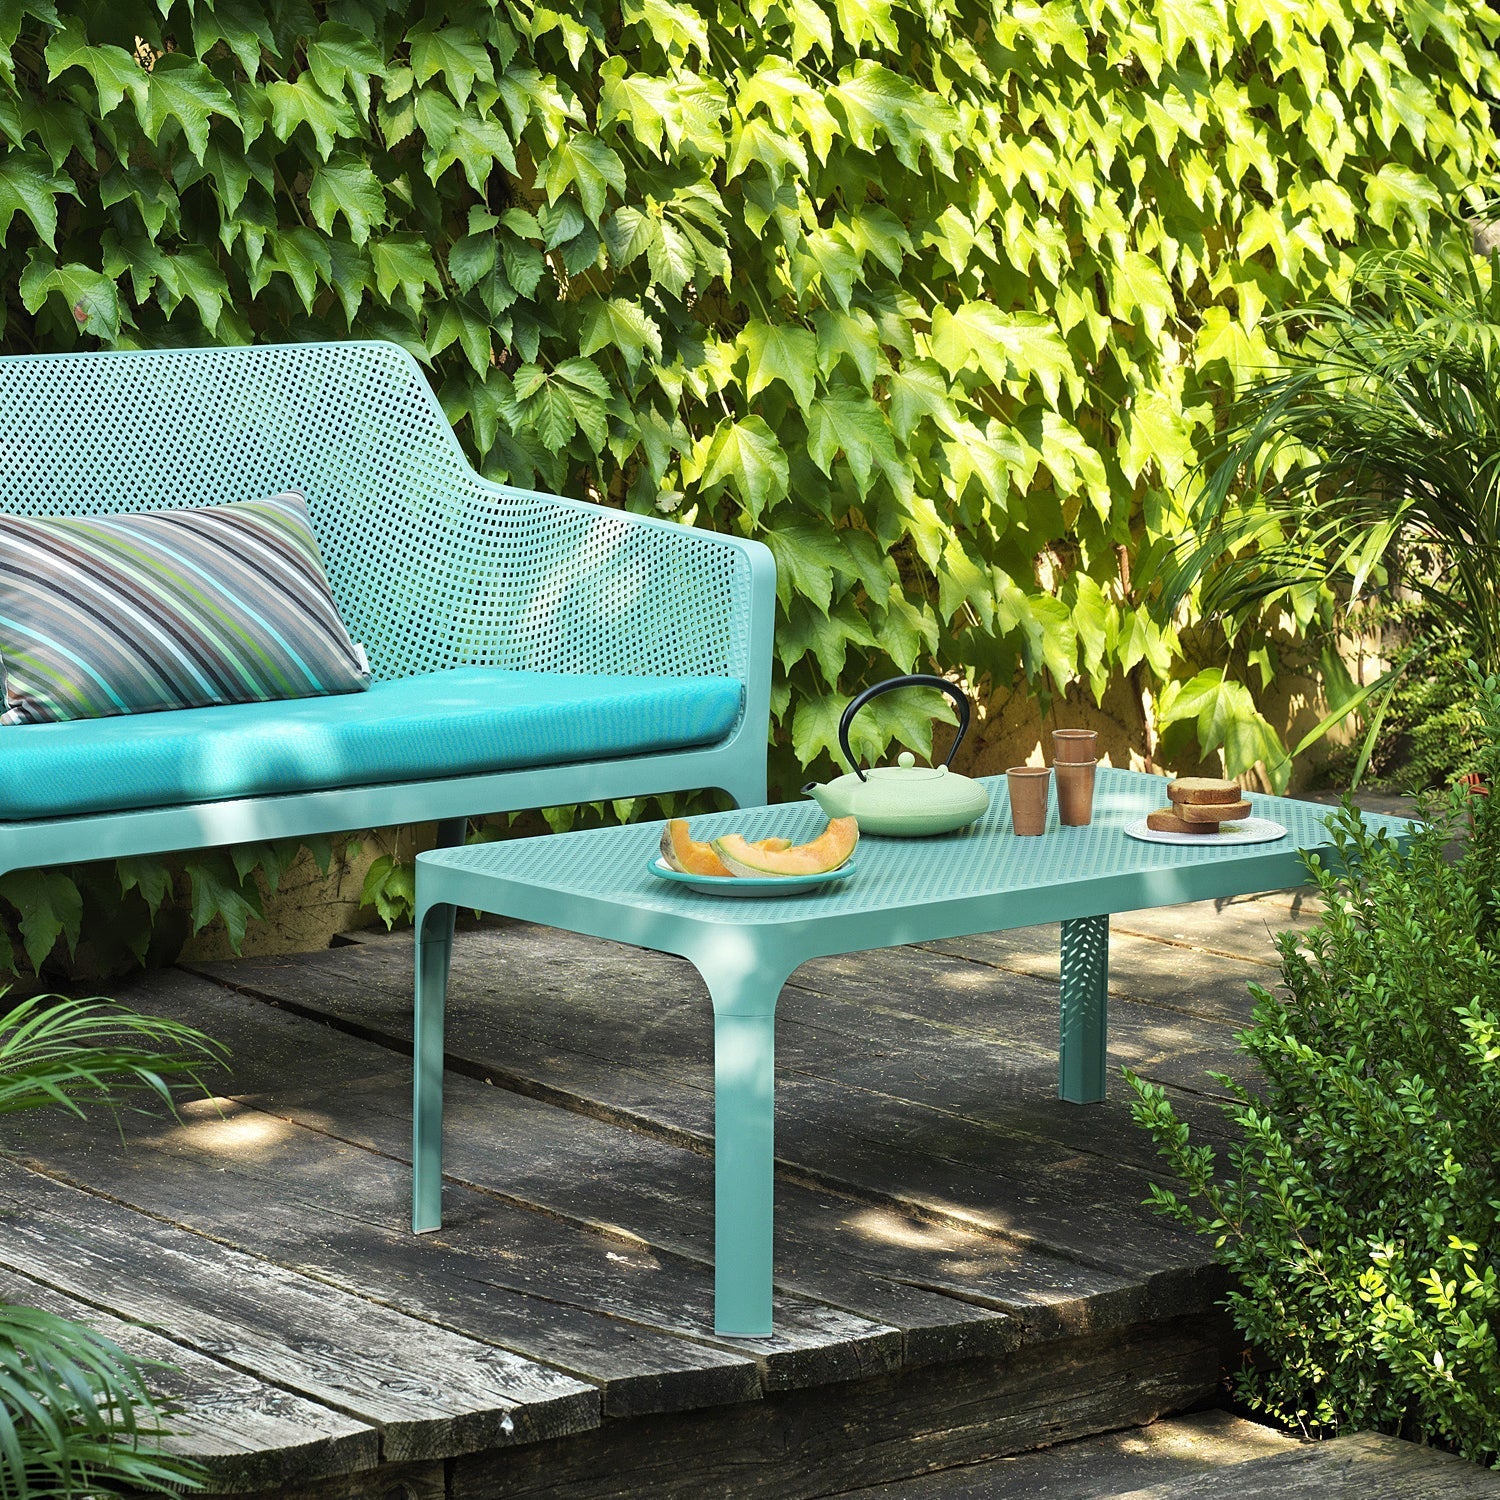 Add Some Style To Your Garden With Nardi